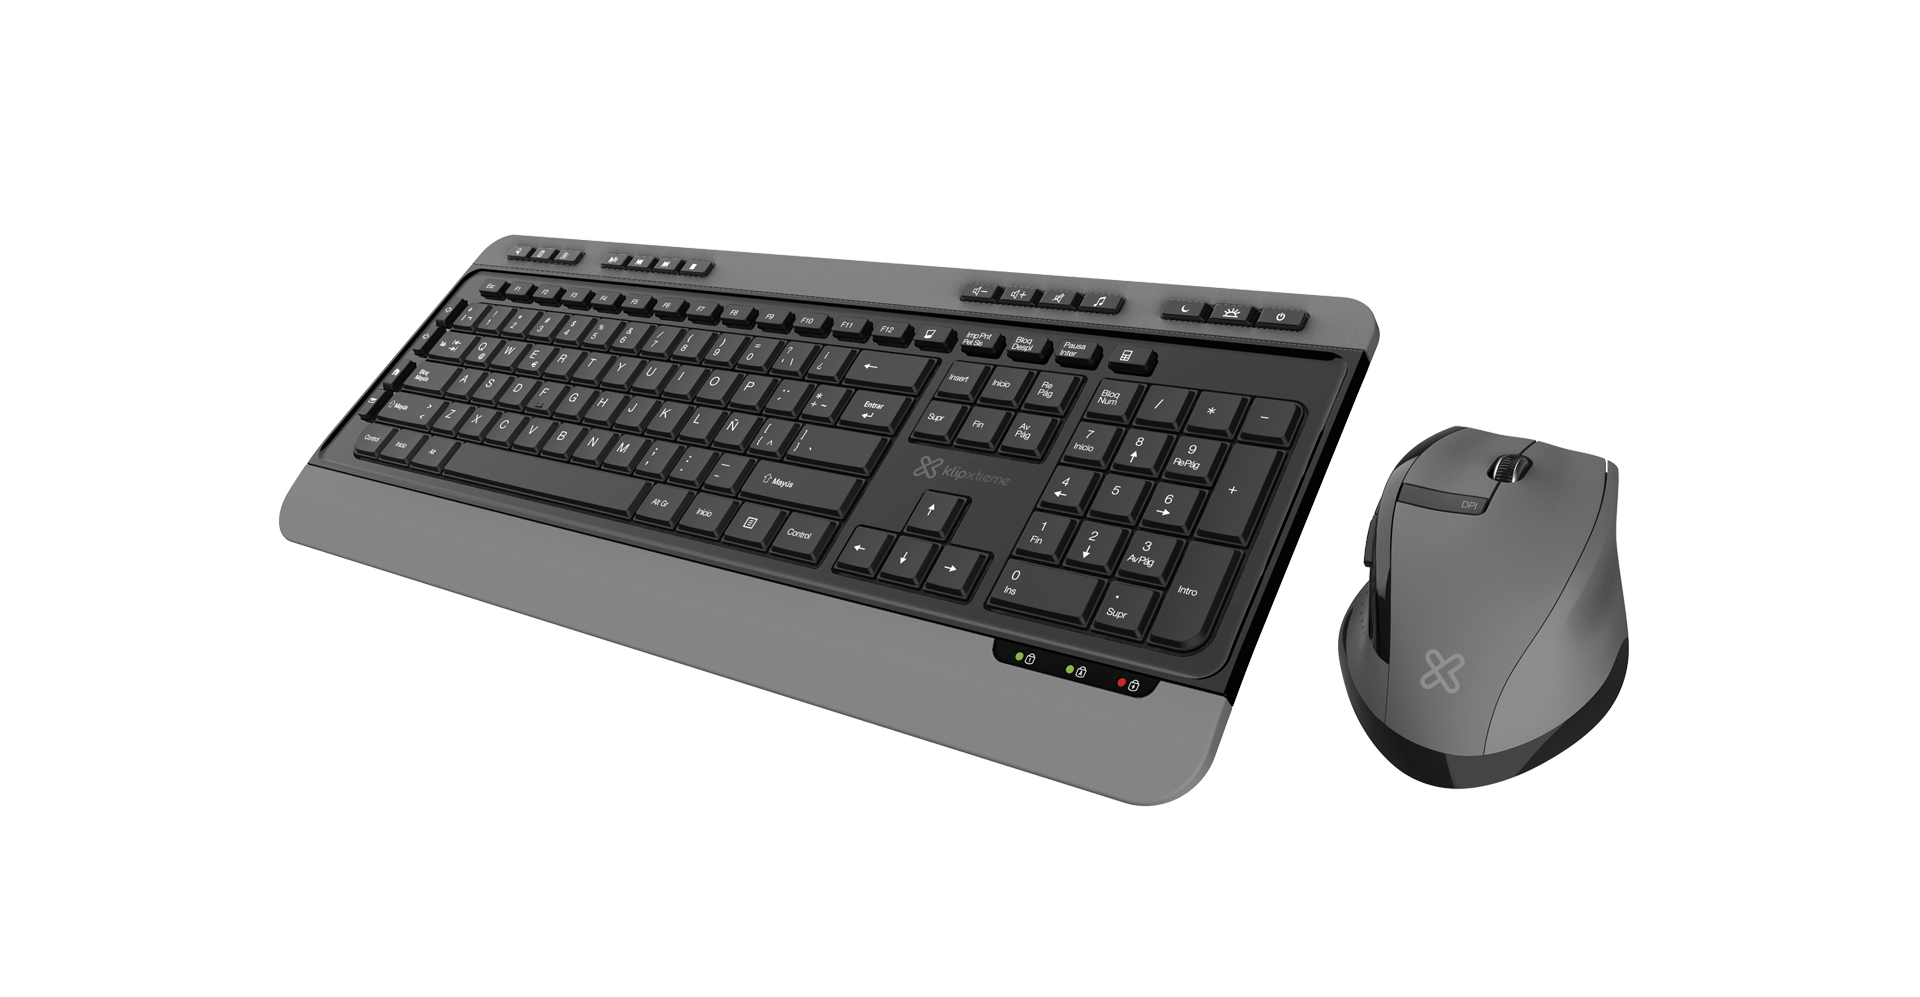 Klip Xtreme  Keyboard And Mouse Set  Spanish  Wireless  24 Ghz  Black And Gray - KBK-520